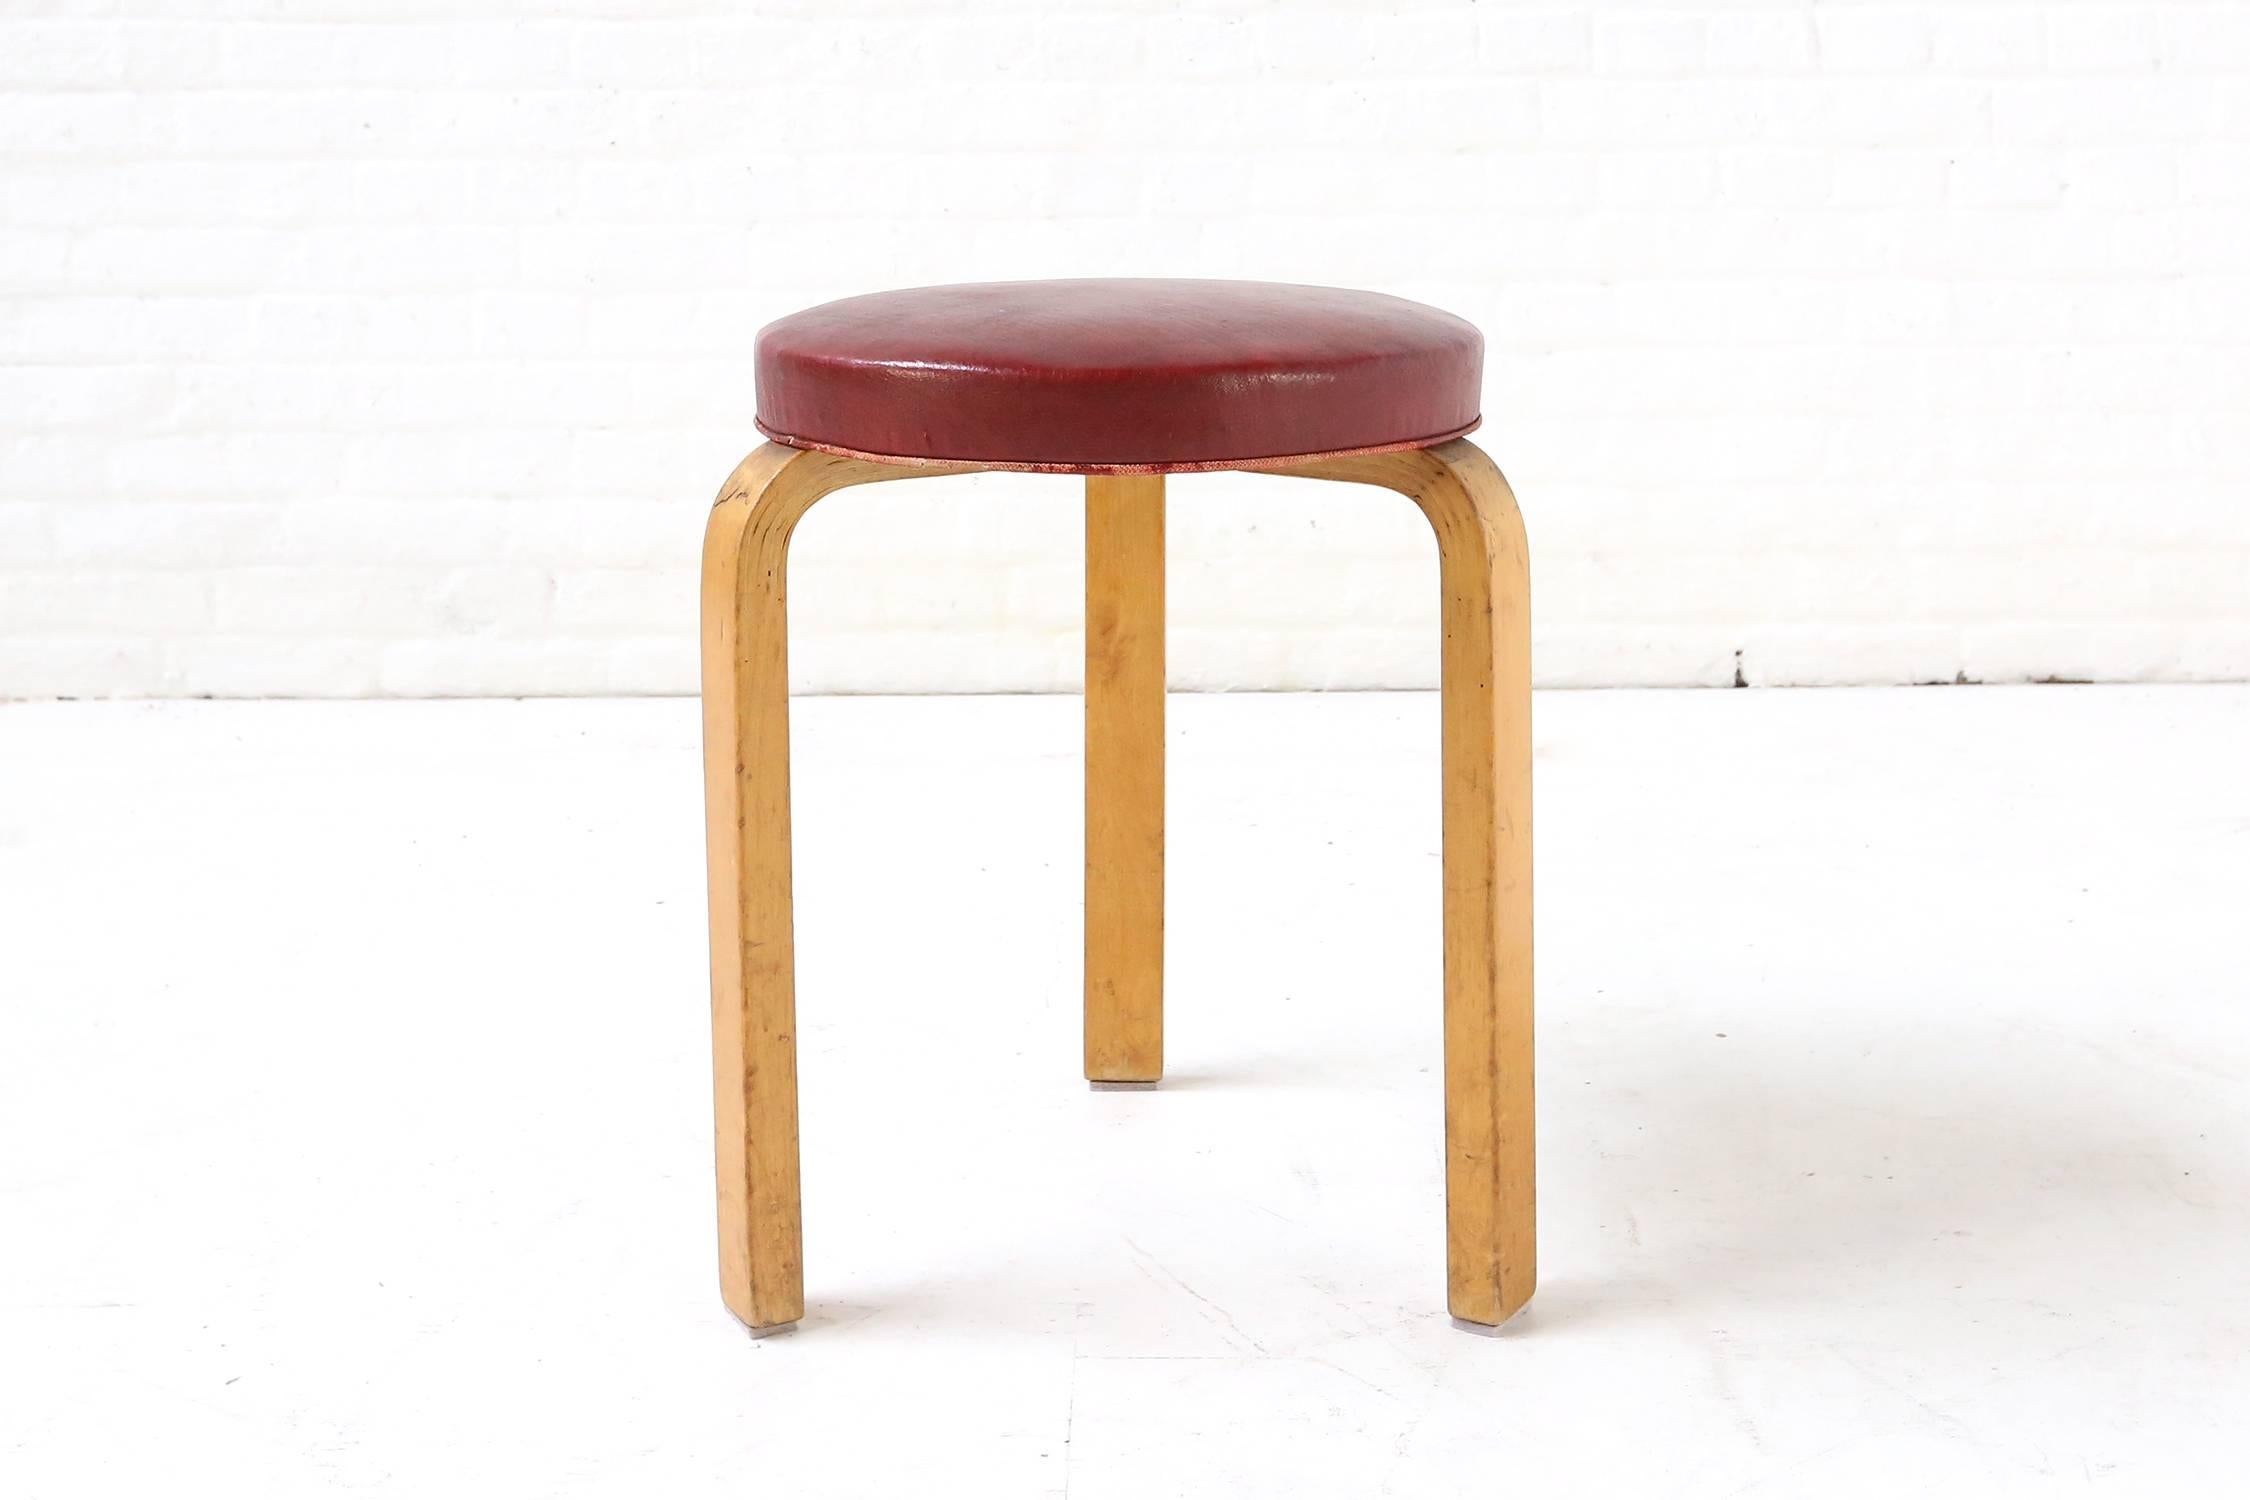 Stool 60 designed by Alvar Aalto in 1933. Manufactured by Artek. The chair is marked with a stamp 